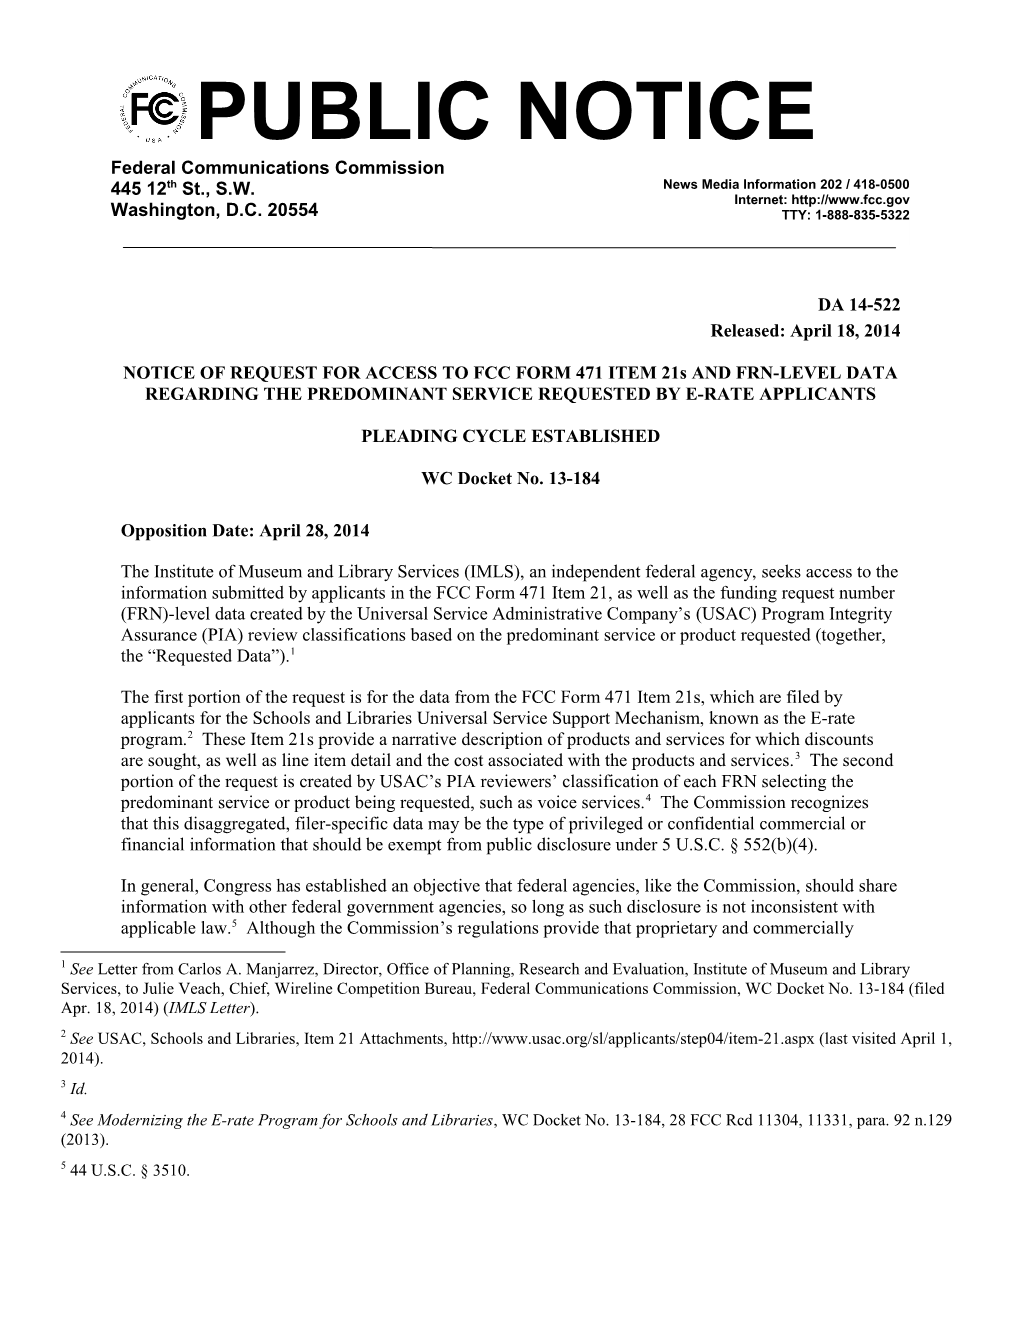 NOTICE of REQUEST for ACCESS to FCC FORM 471 ITEM 21S and FRN-LEVEL DATA REGARDING THE